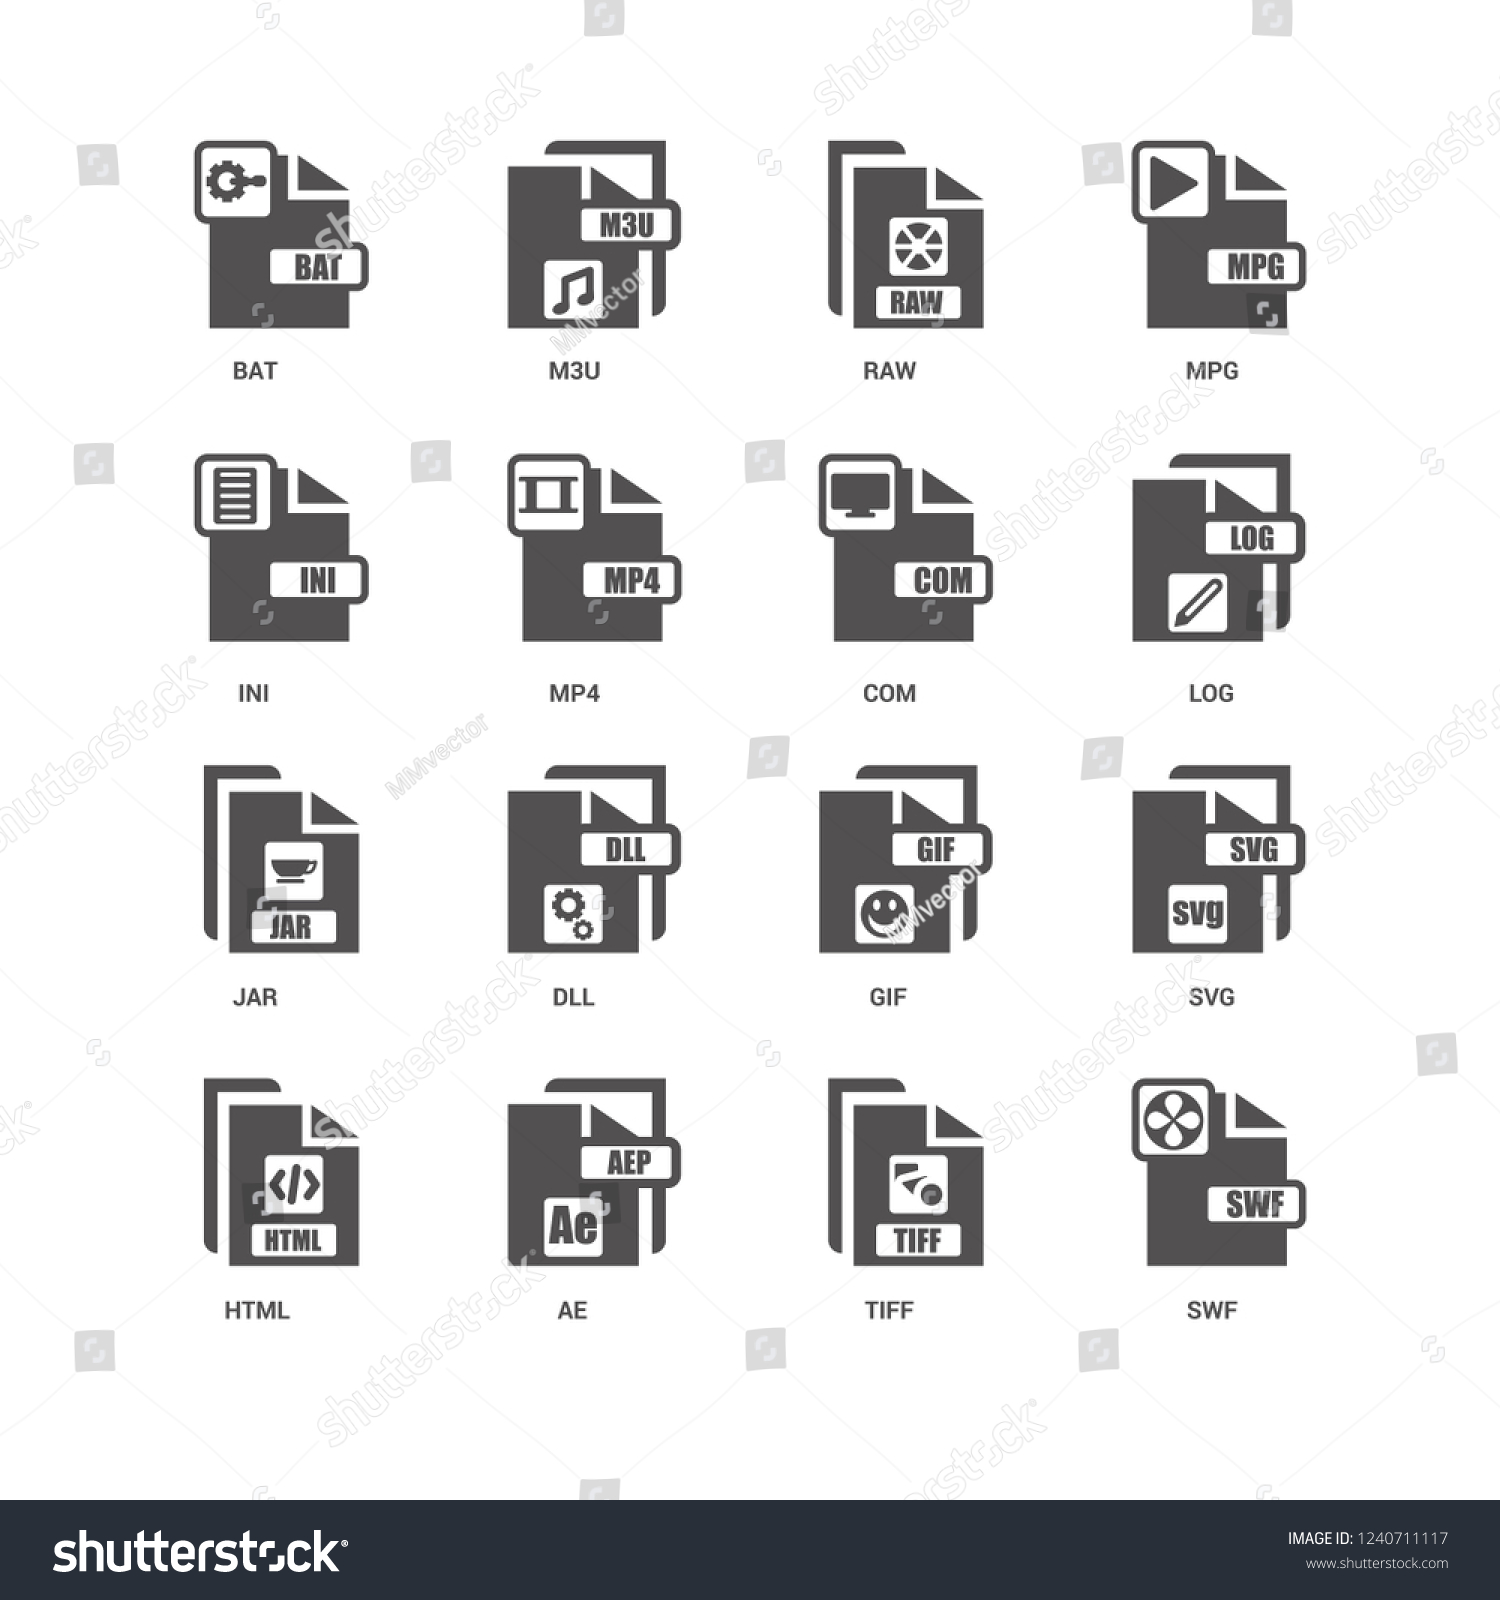 SVG of Swf, Log, Com, Html, Svg, Bat, Ini, Jar, Tiff, AE, Raw icon 16 set EPS 10 vector format. Icons optimized for both large and small resolutions. svg